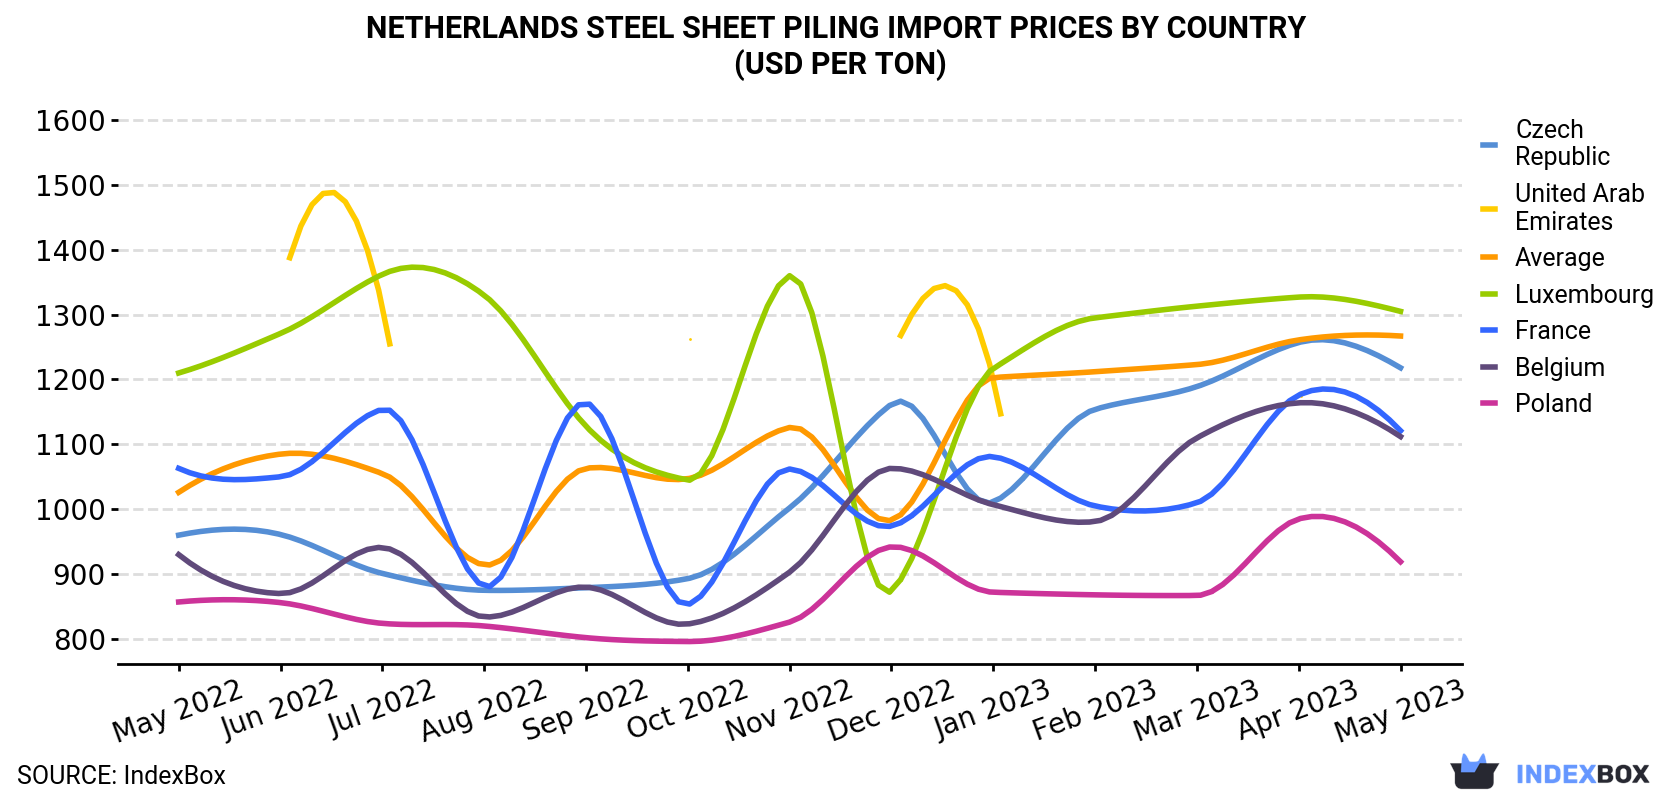 Netherlands Steel Sheet Piling Import Prices By Country (USD Per Ton)